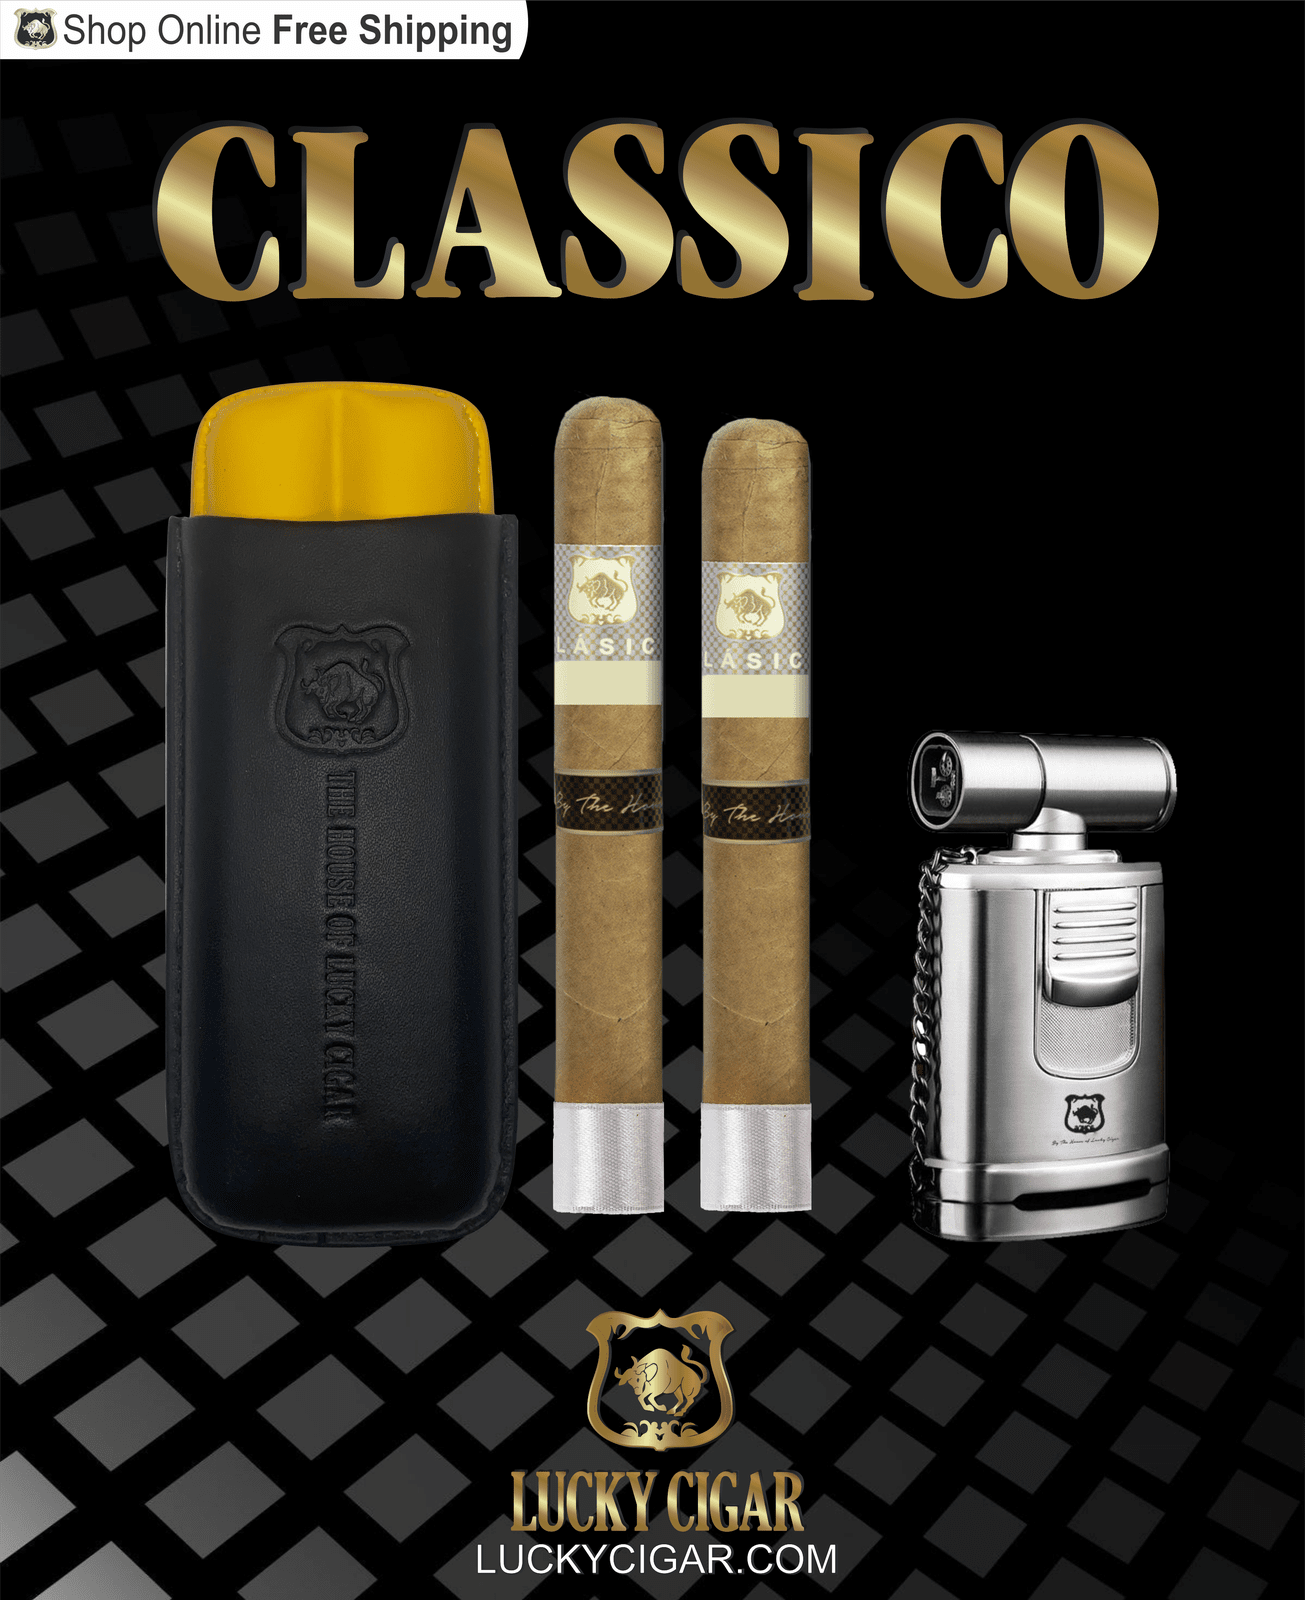 Lucky Cigar Sampler Sets: Set of 2 Classico Cigars, Toro with Table Torch